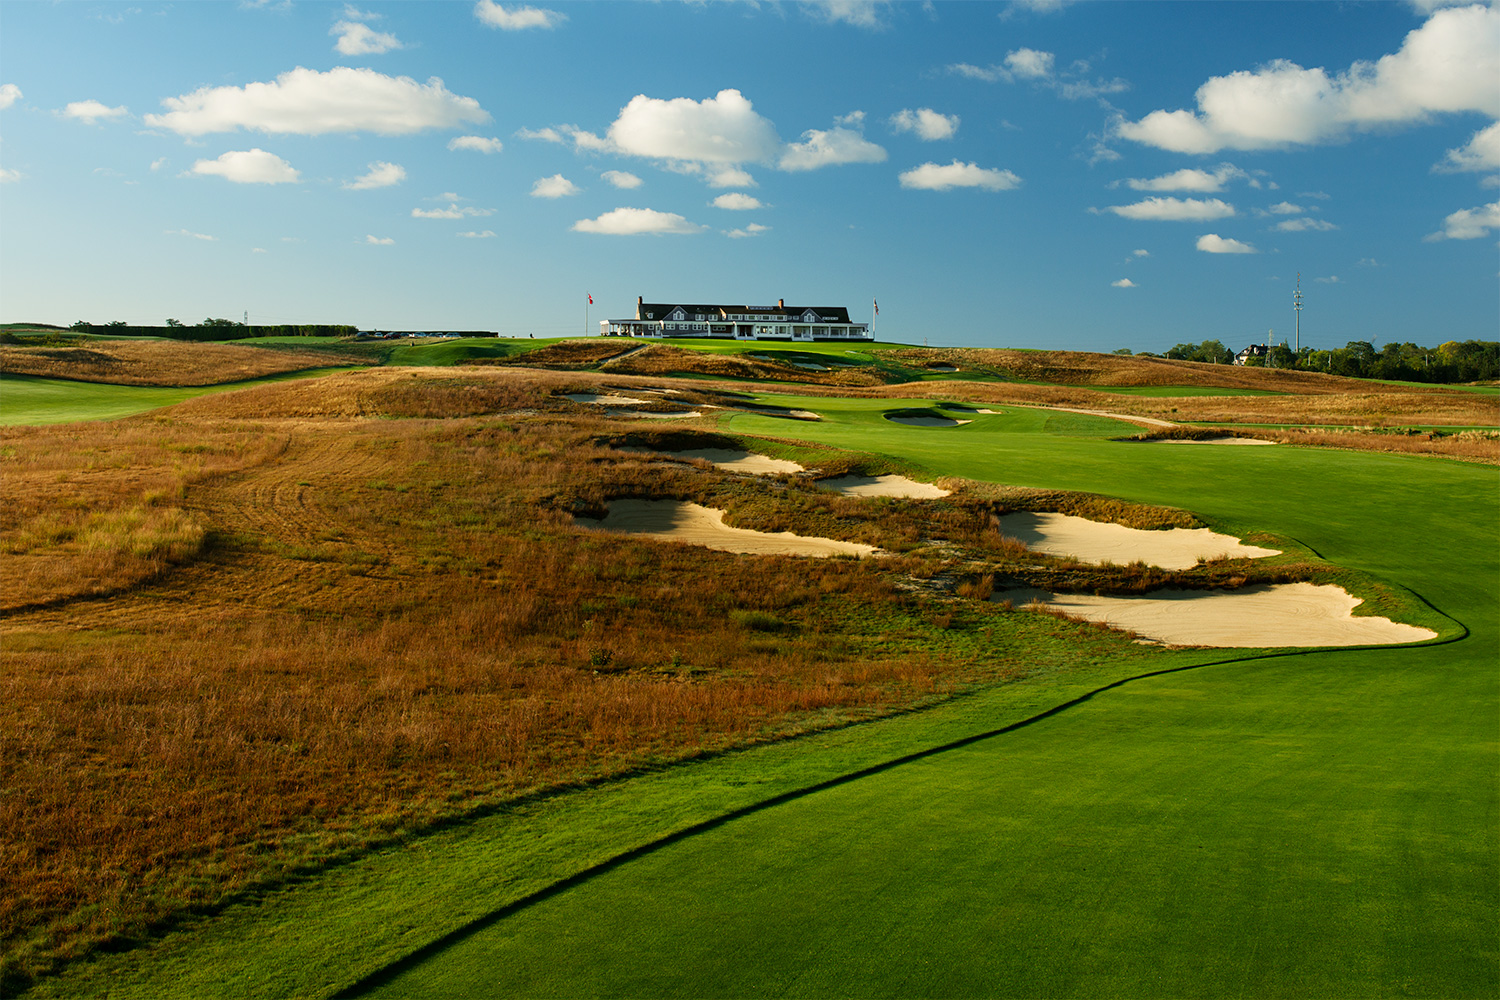 The par-5 16th was the easiest hole in the final round of the 2004 US Open (4.803 stroke average), but it’s 616 yards today versus 540 yards then.